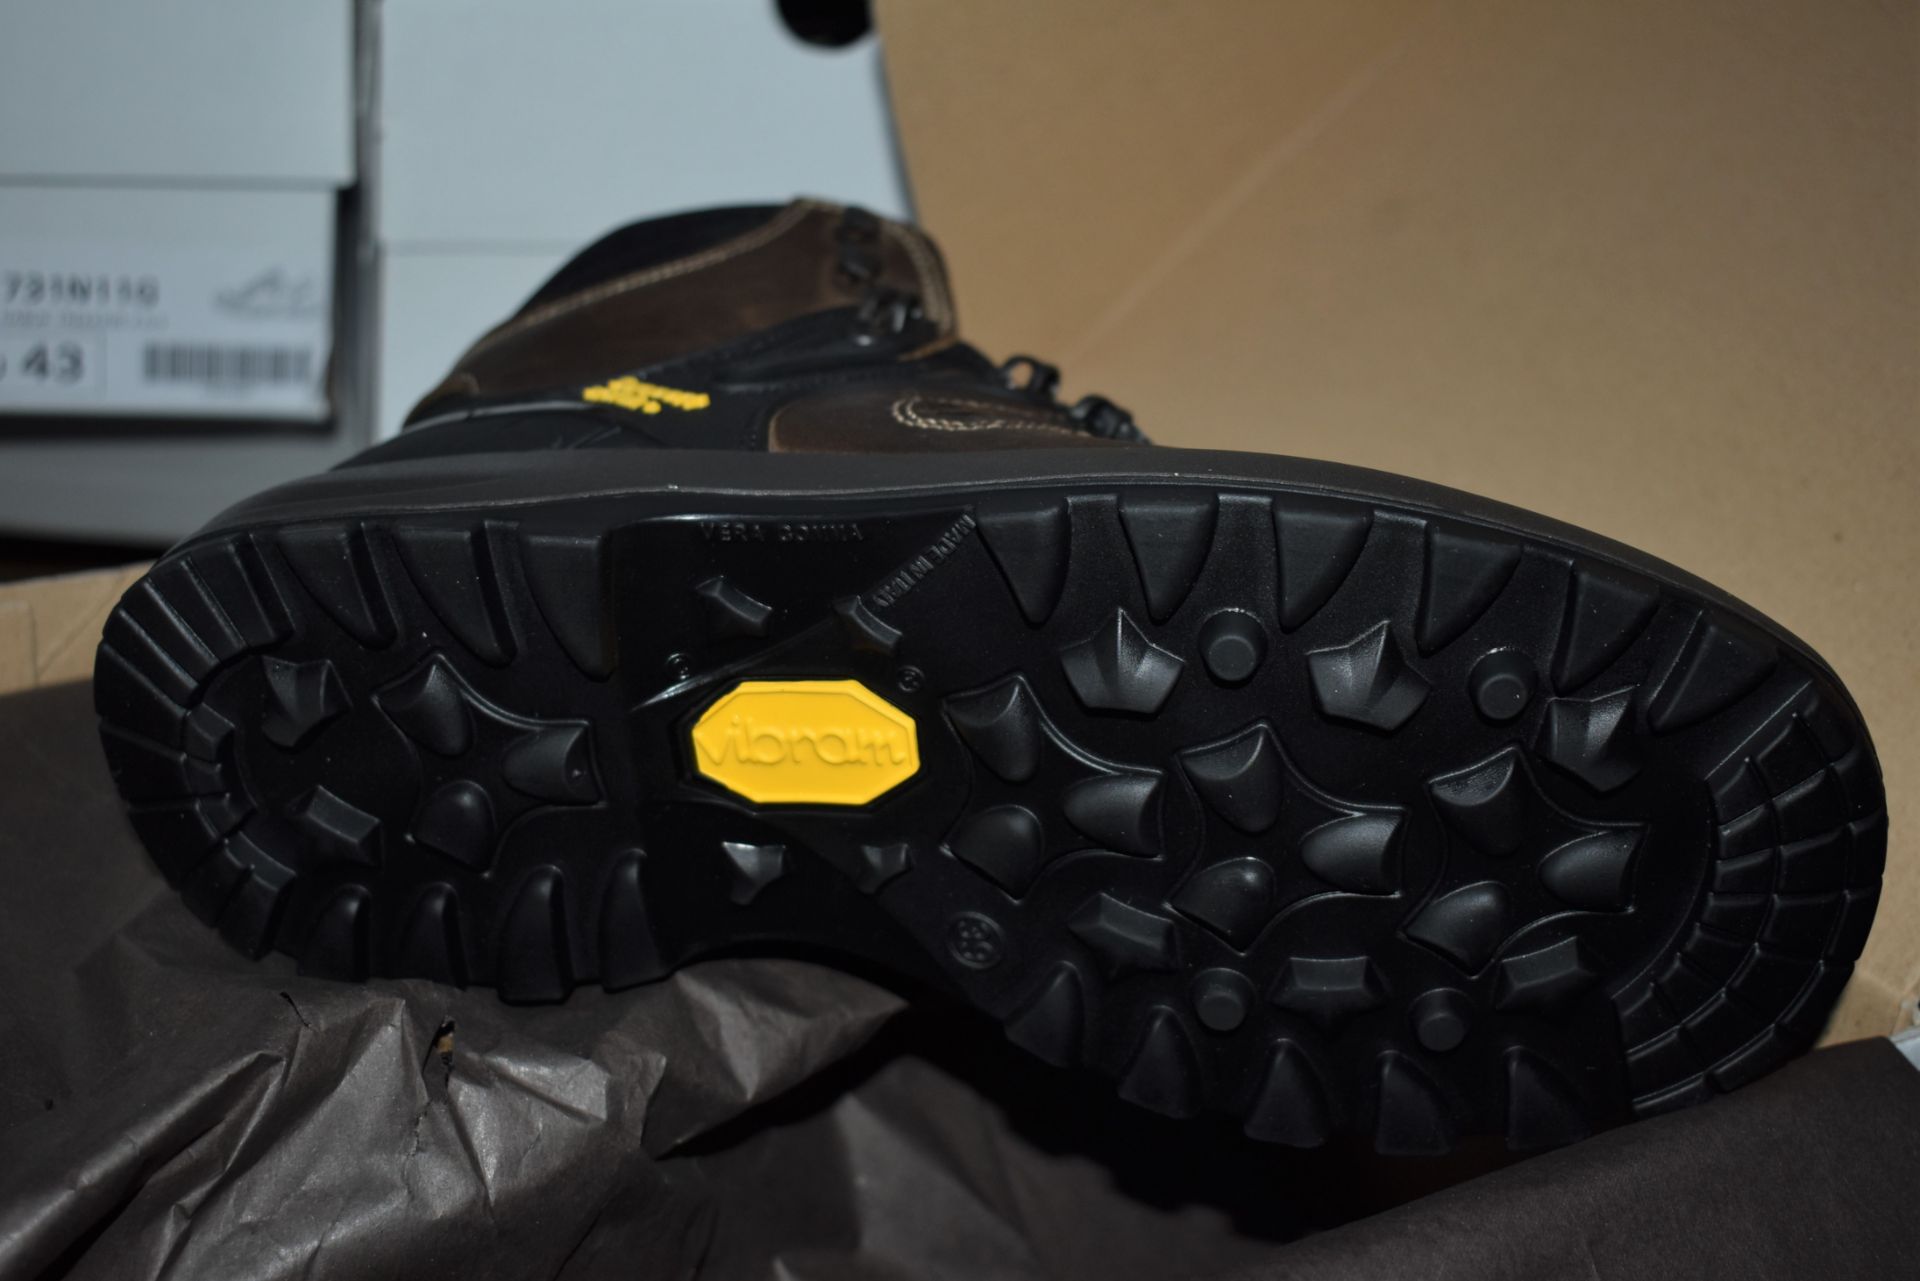 1 x Pair of Mens VIBRAM Walking Boots - Outdoor Pro Spo-Tex Trekking Boots With Support System - - Image 4 of 4